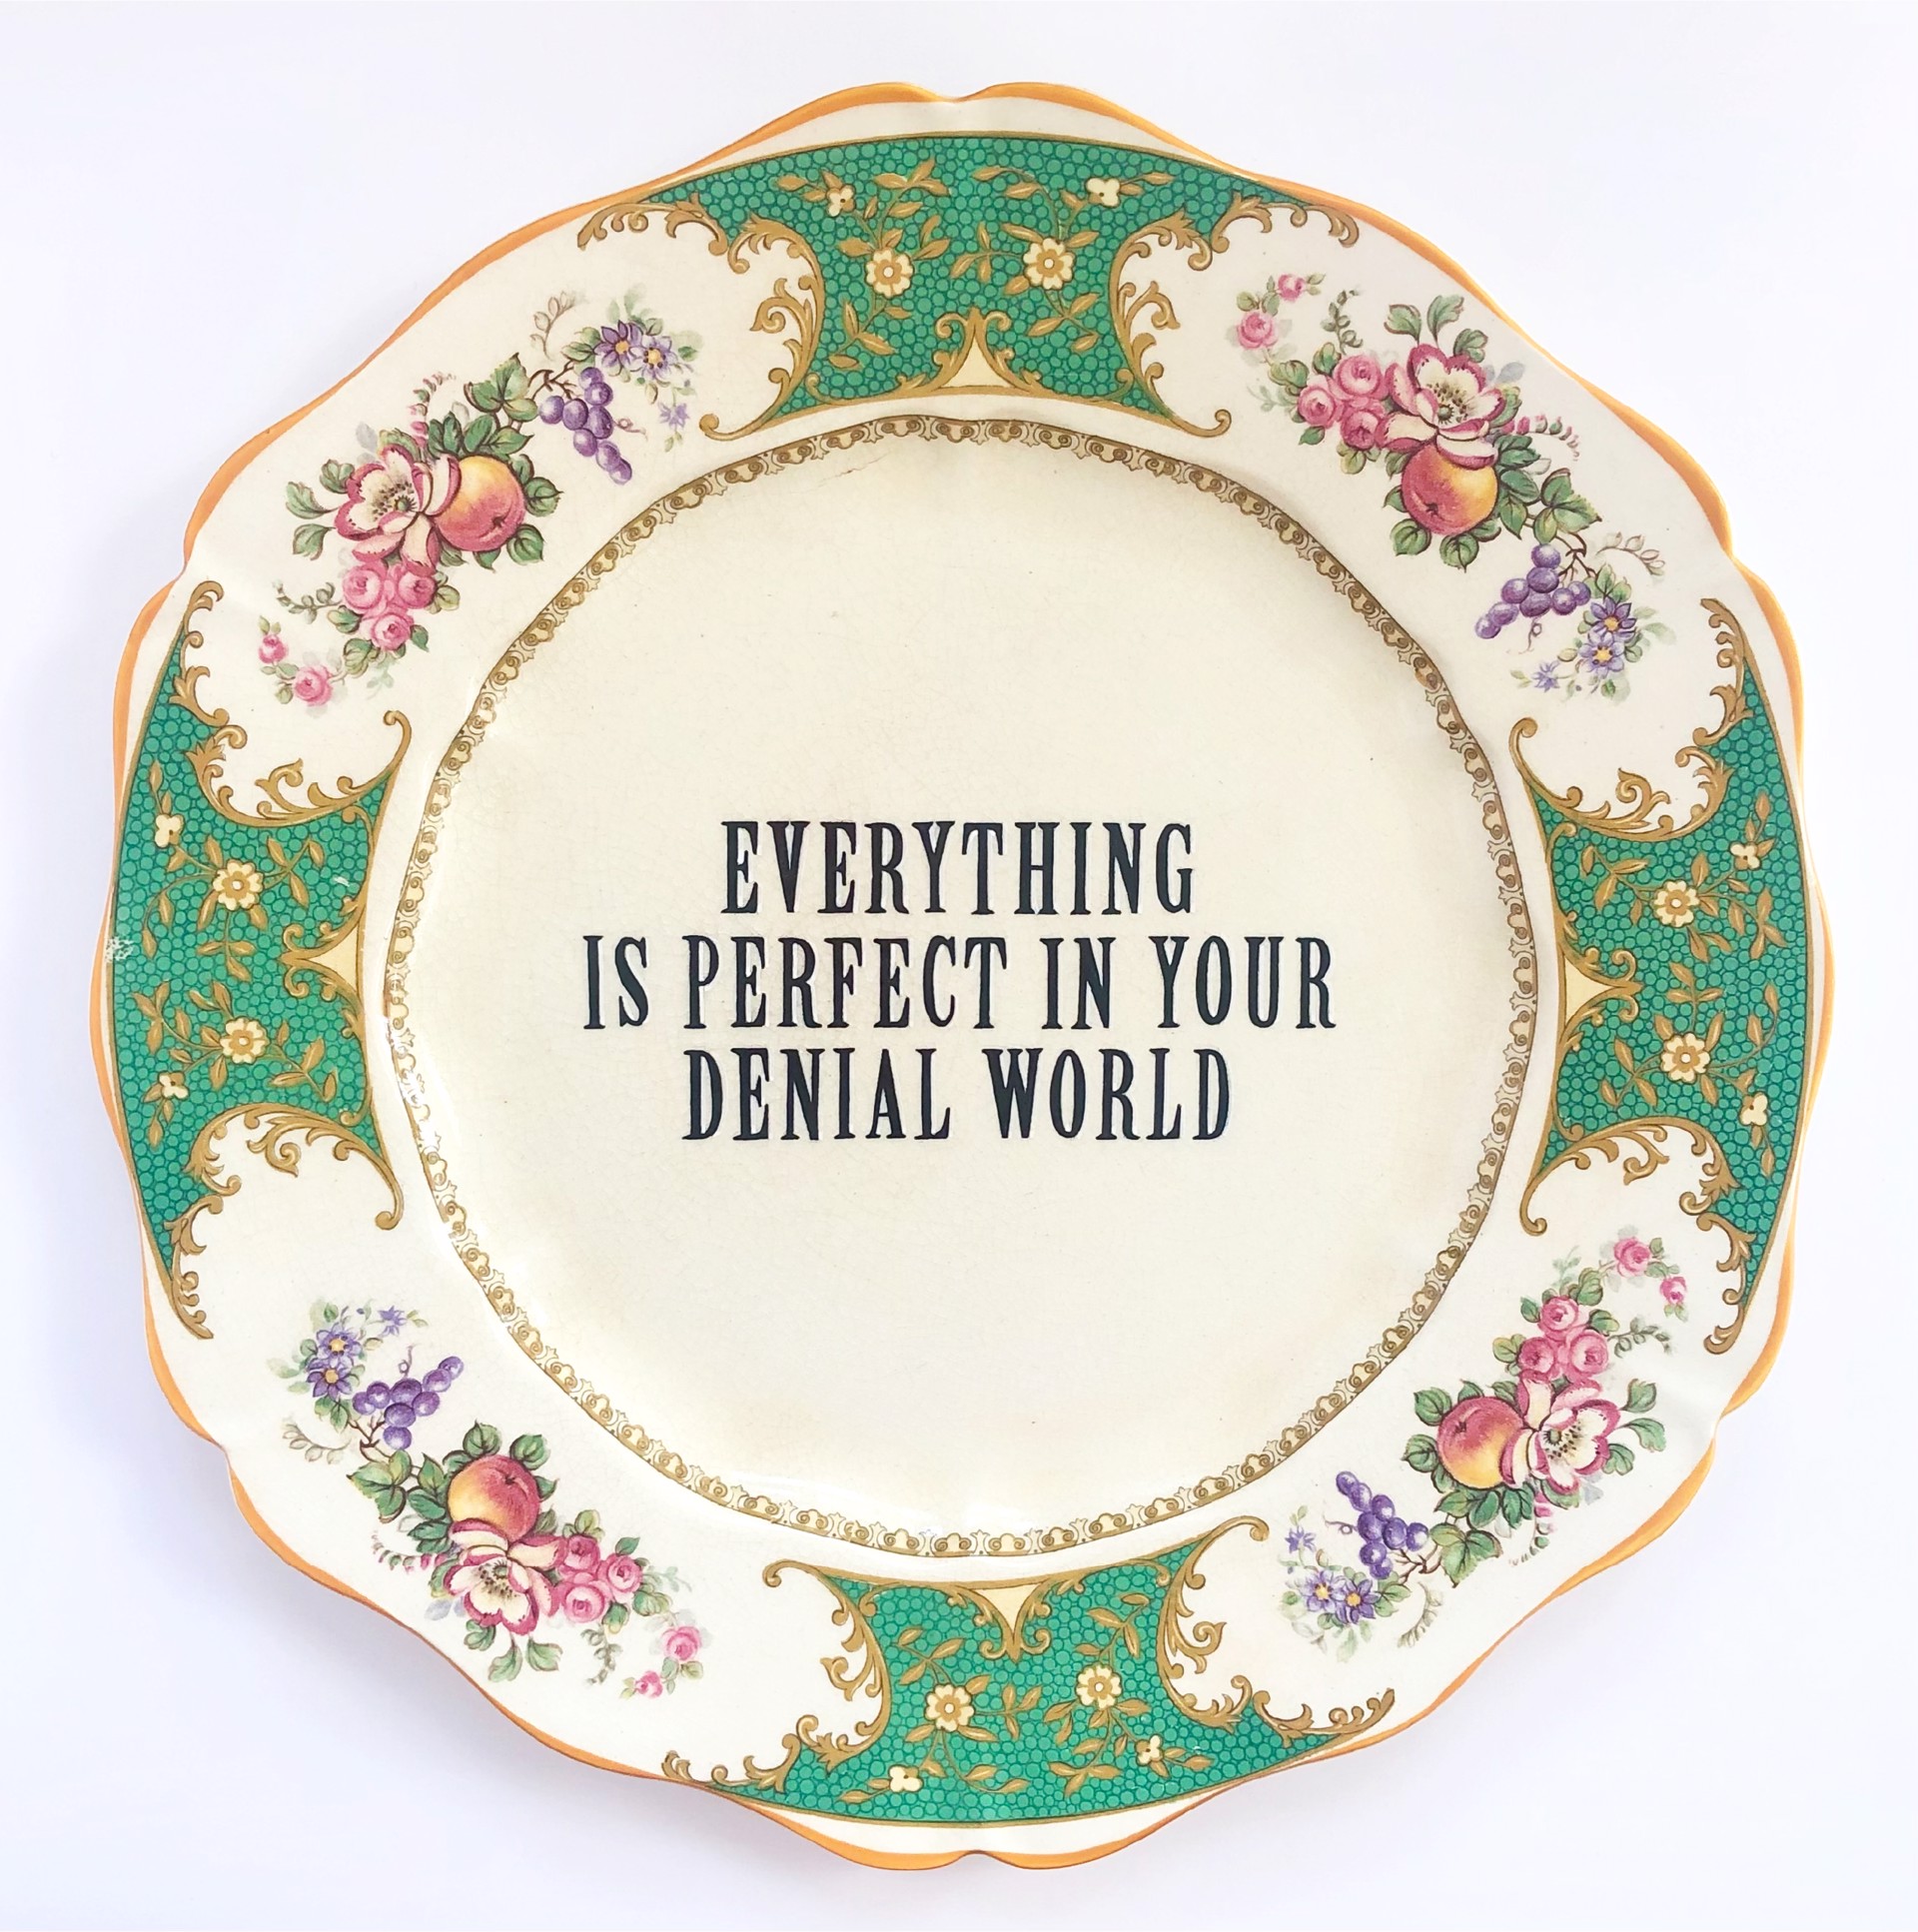 Everything is perfect in your denial world by Marie-Claude Marquis